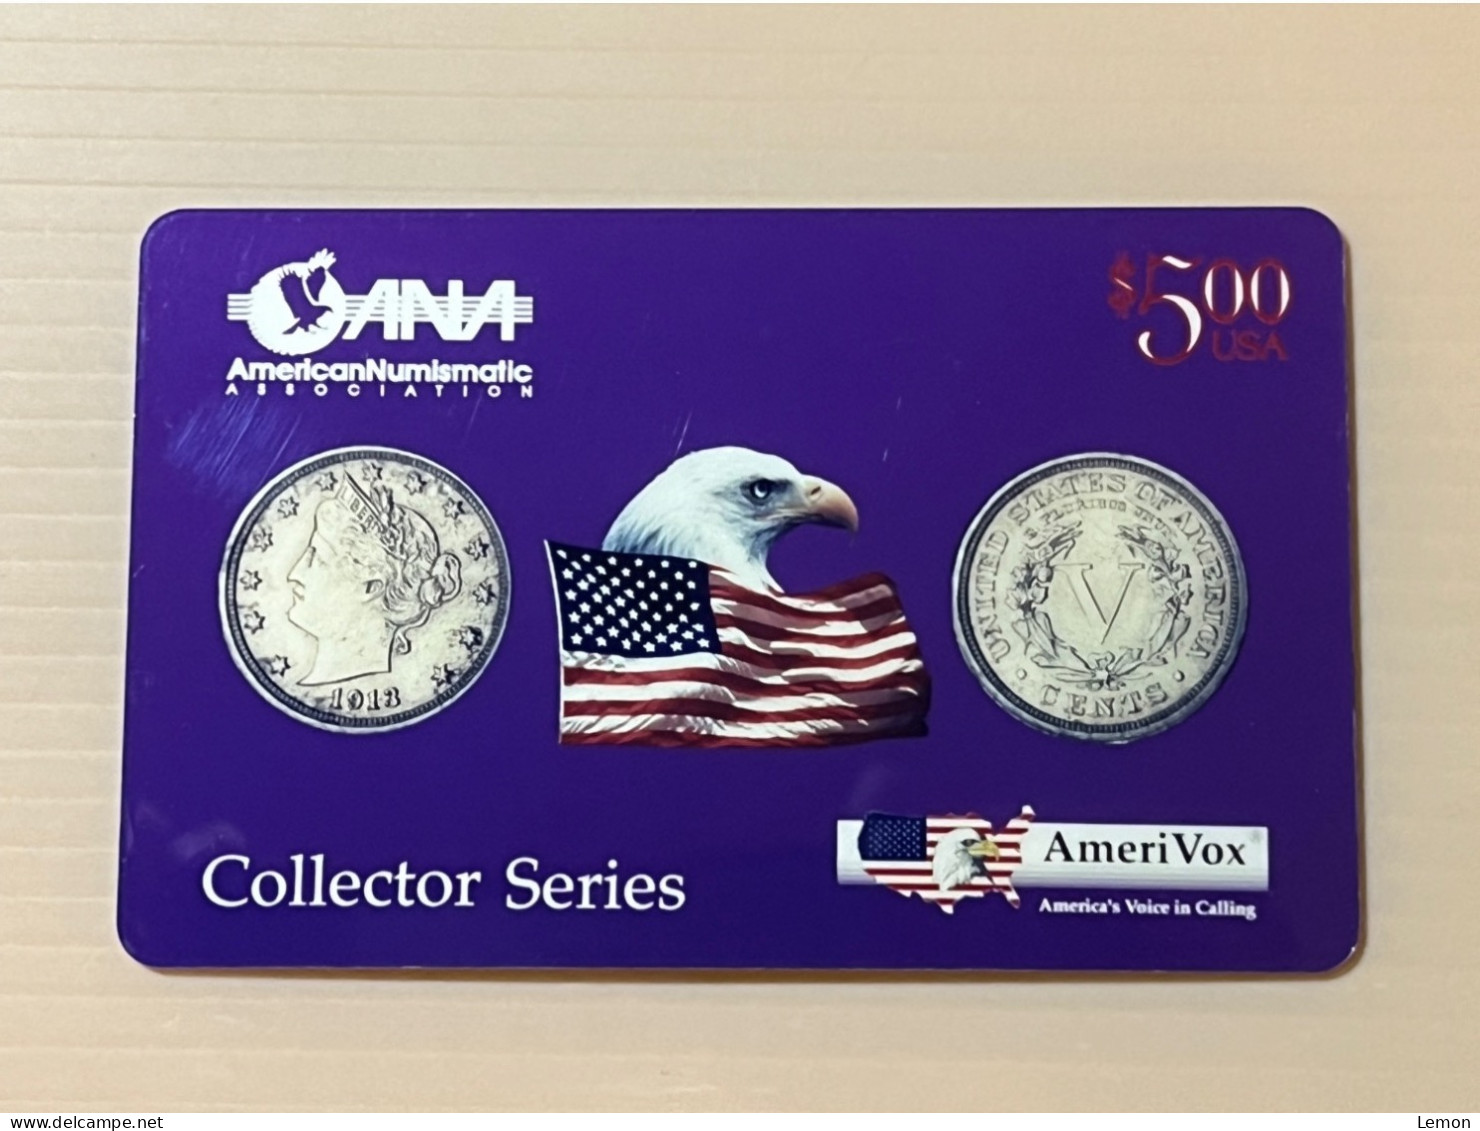 Mint USA UNITED STATES America Prepaid Telecard Phonecard, Liberty Head Nickel Coin Flag Eagle, Set Of 1 Mint Card - Colecciones